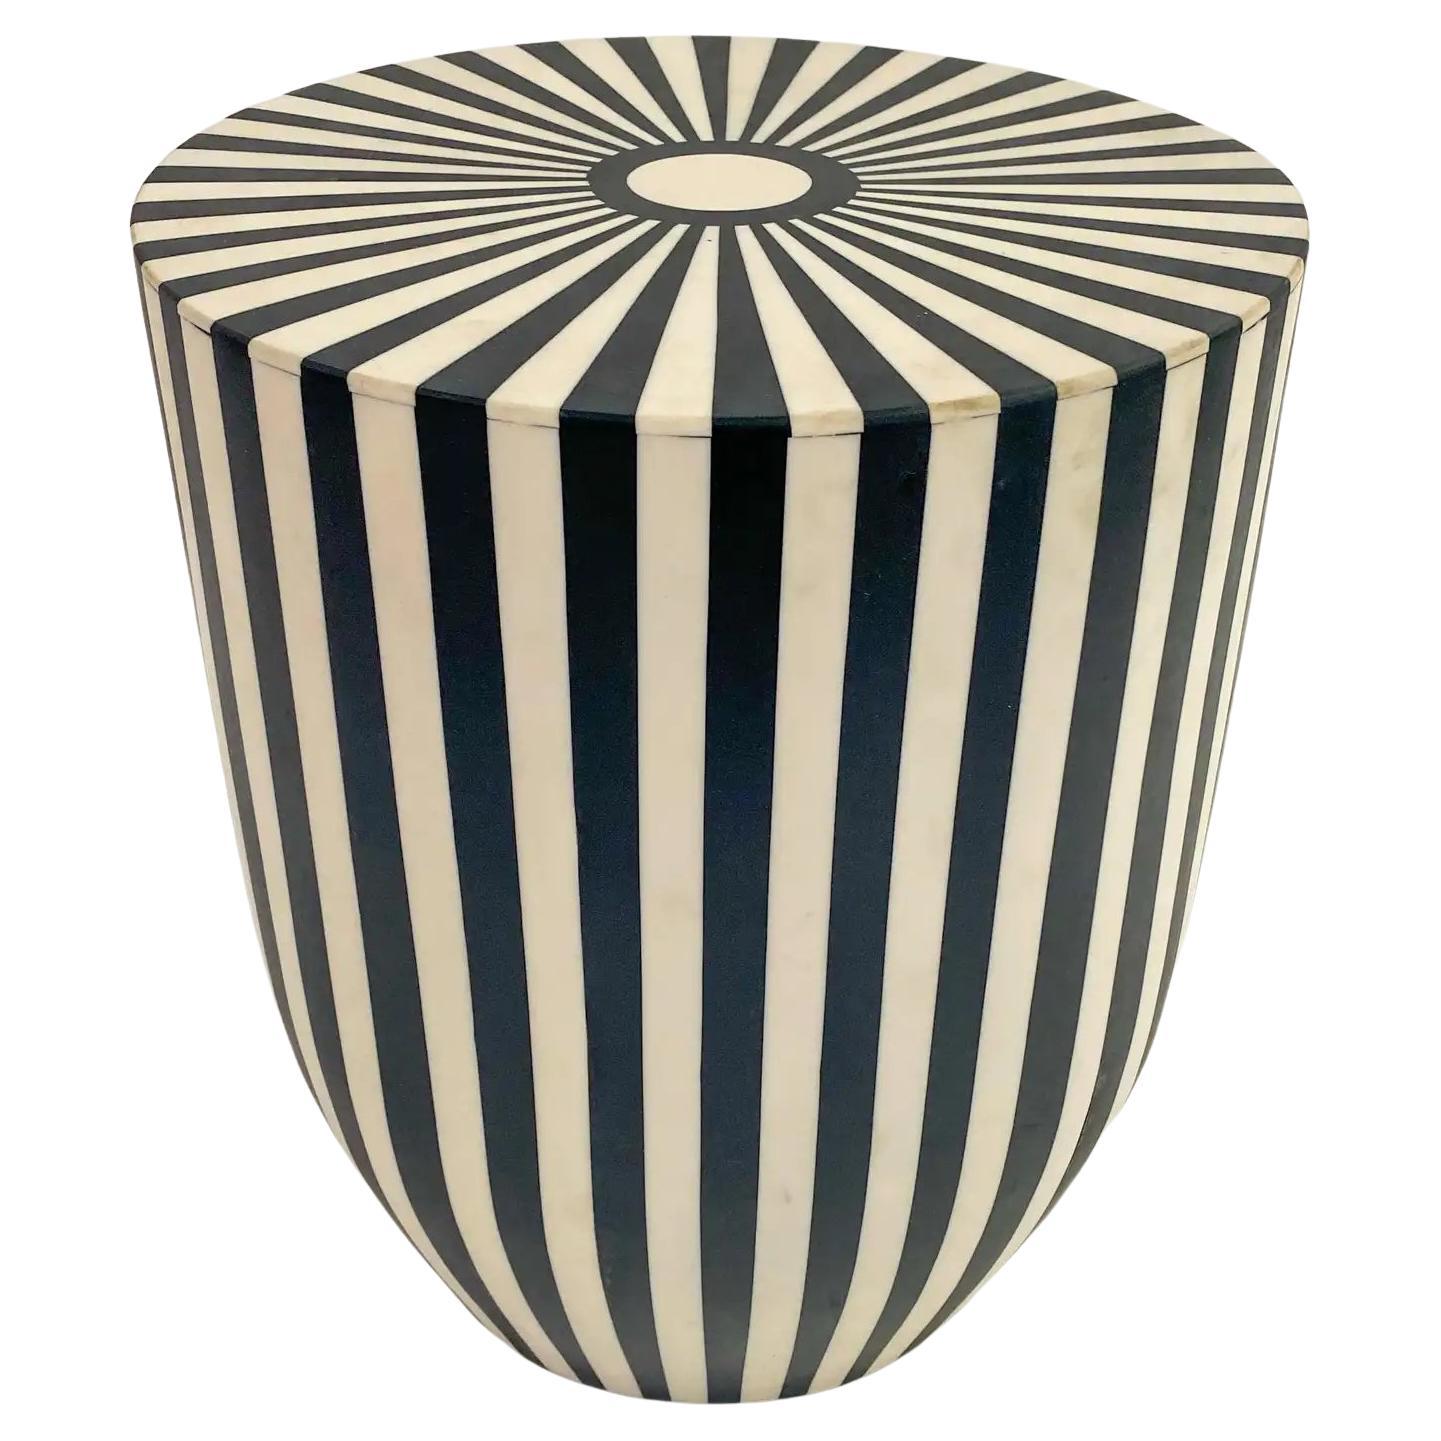 Art Deco Style Black and White Resin Side, End Table or Stool For Sale